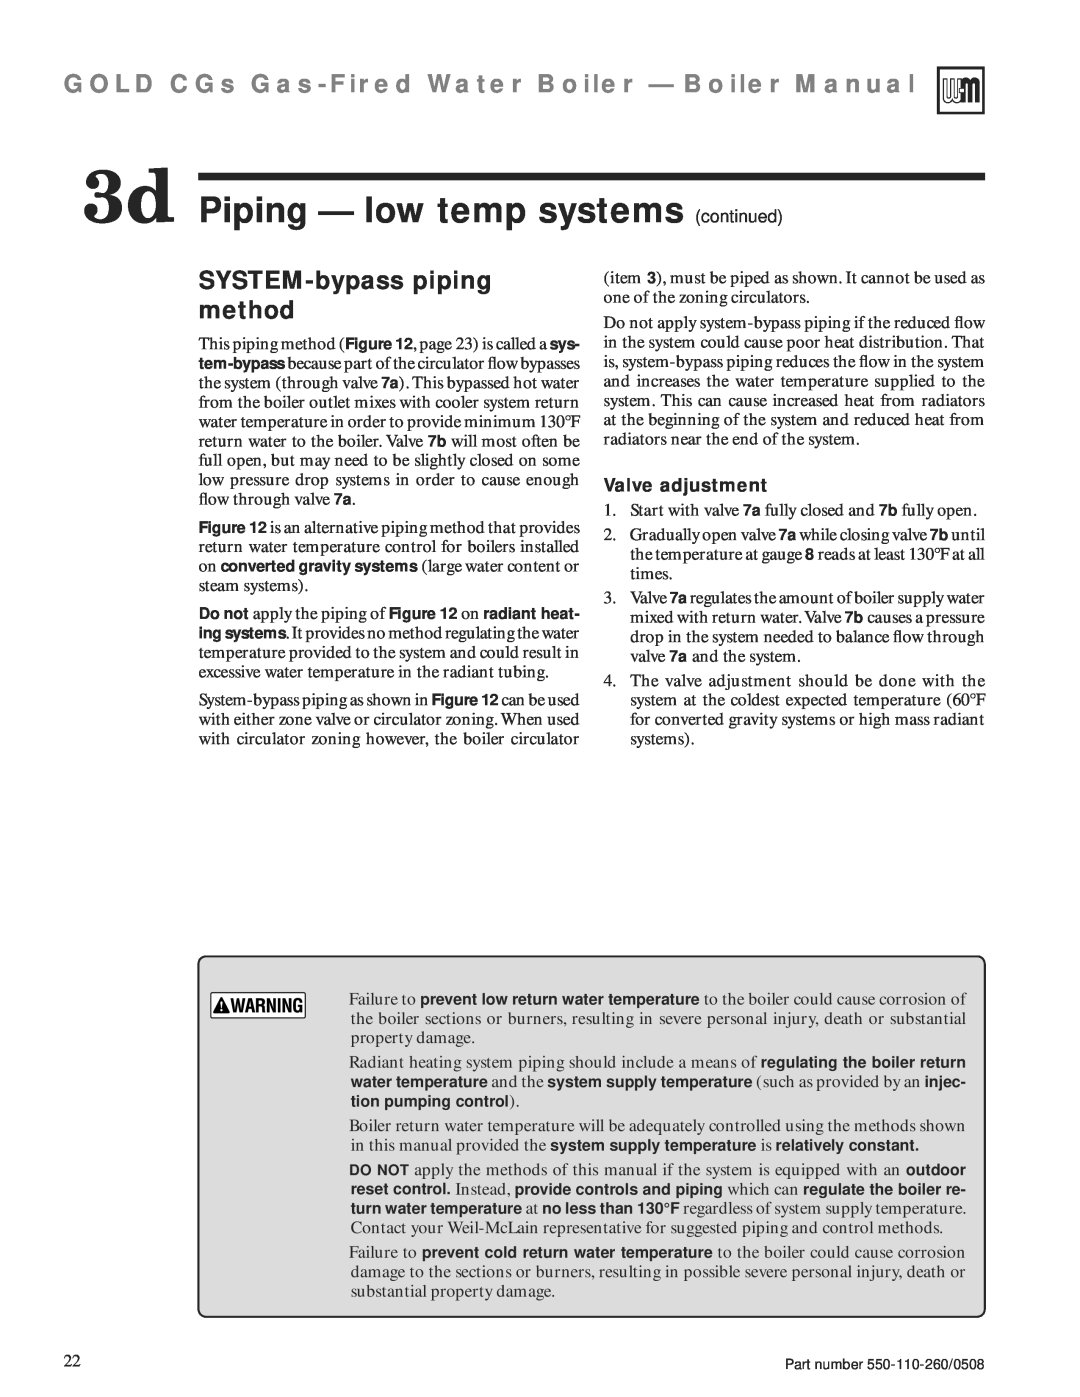 Weil-McLain 550-110-260/0508 manual SYSTEM-bypasspiping method, 3d Piping — low temp systems continued, Valve adjustment 